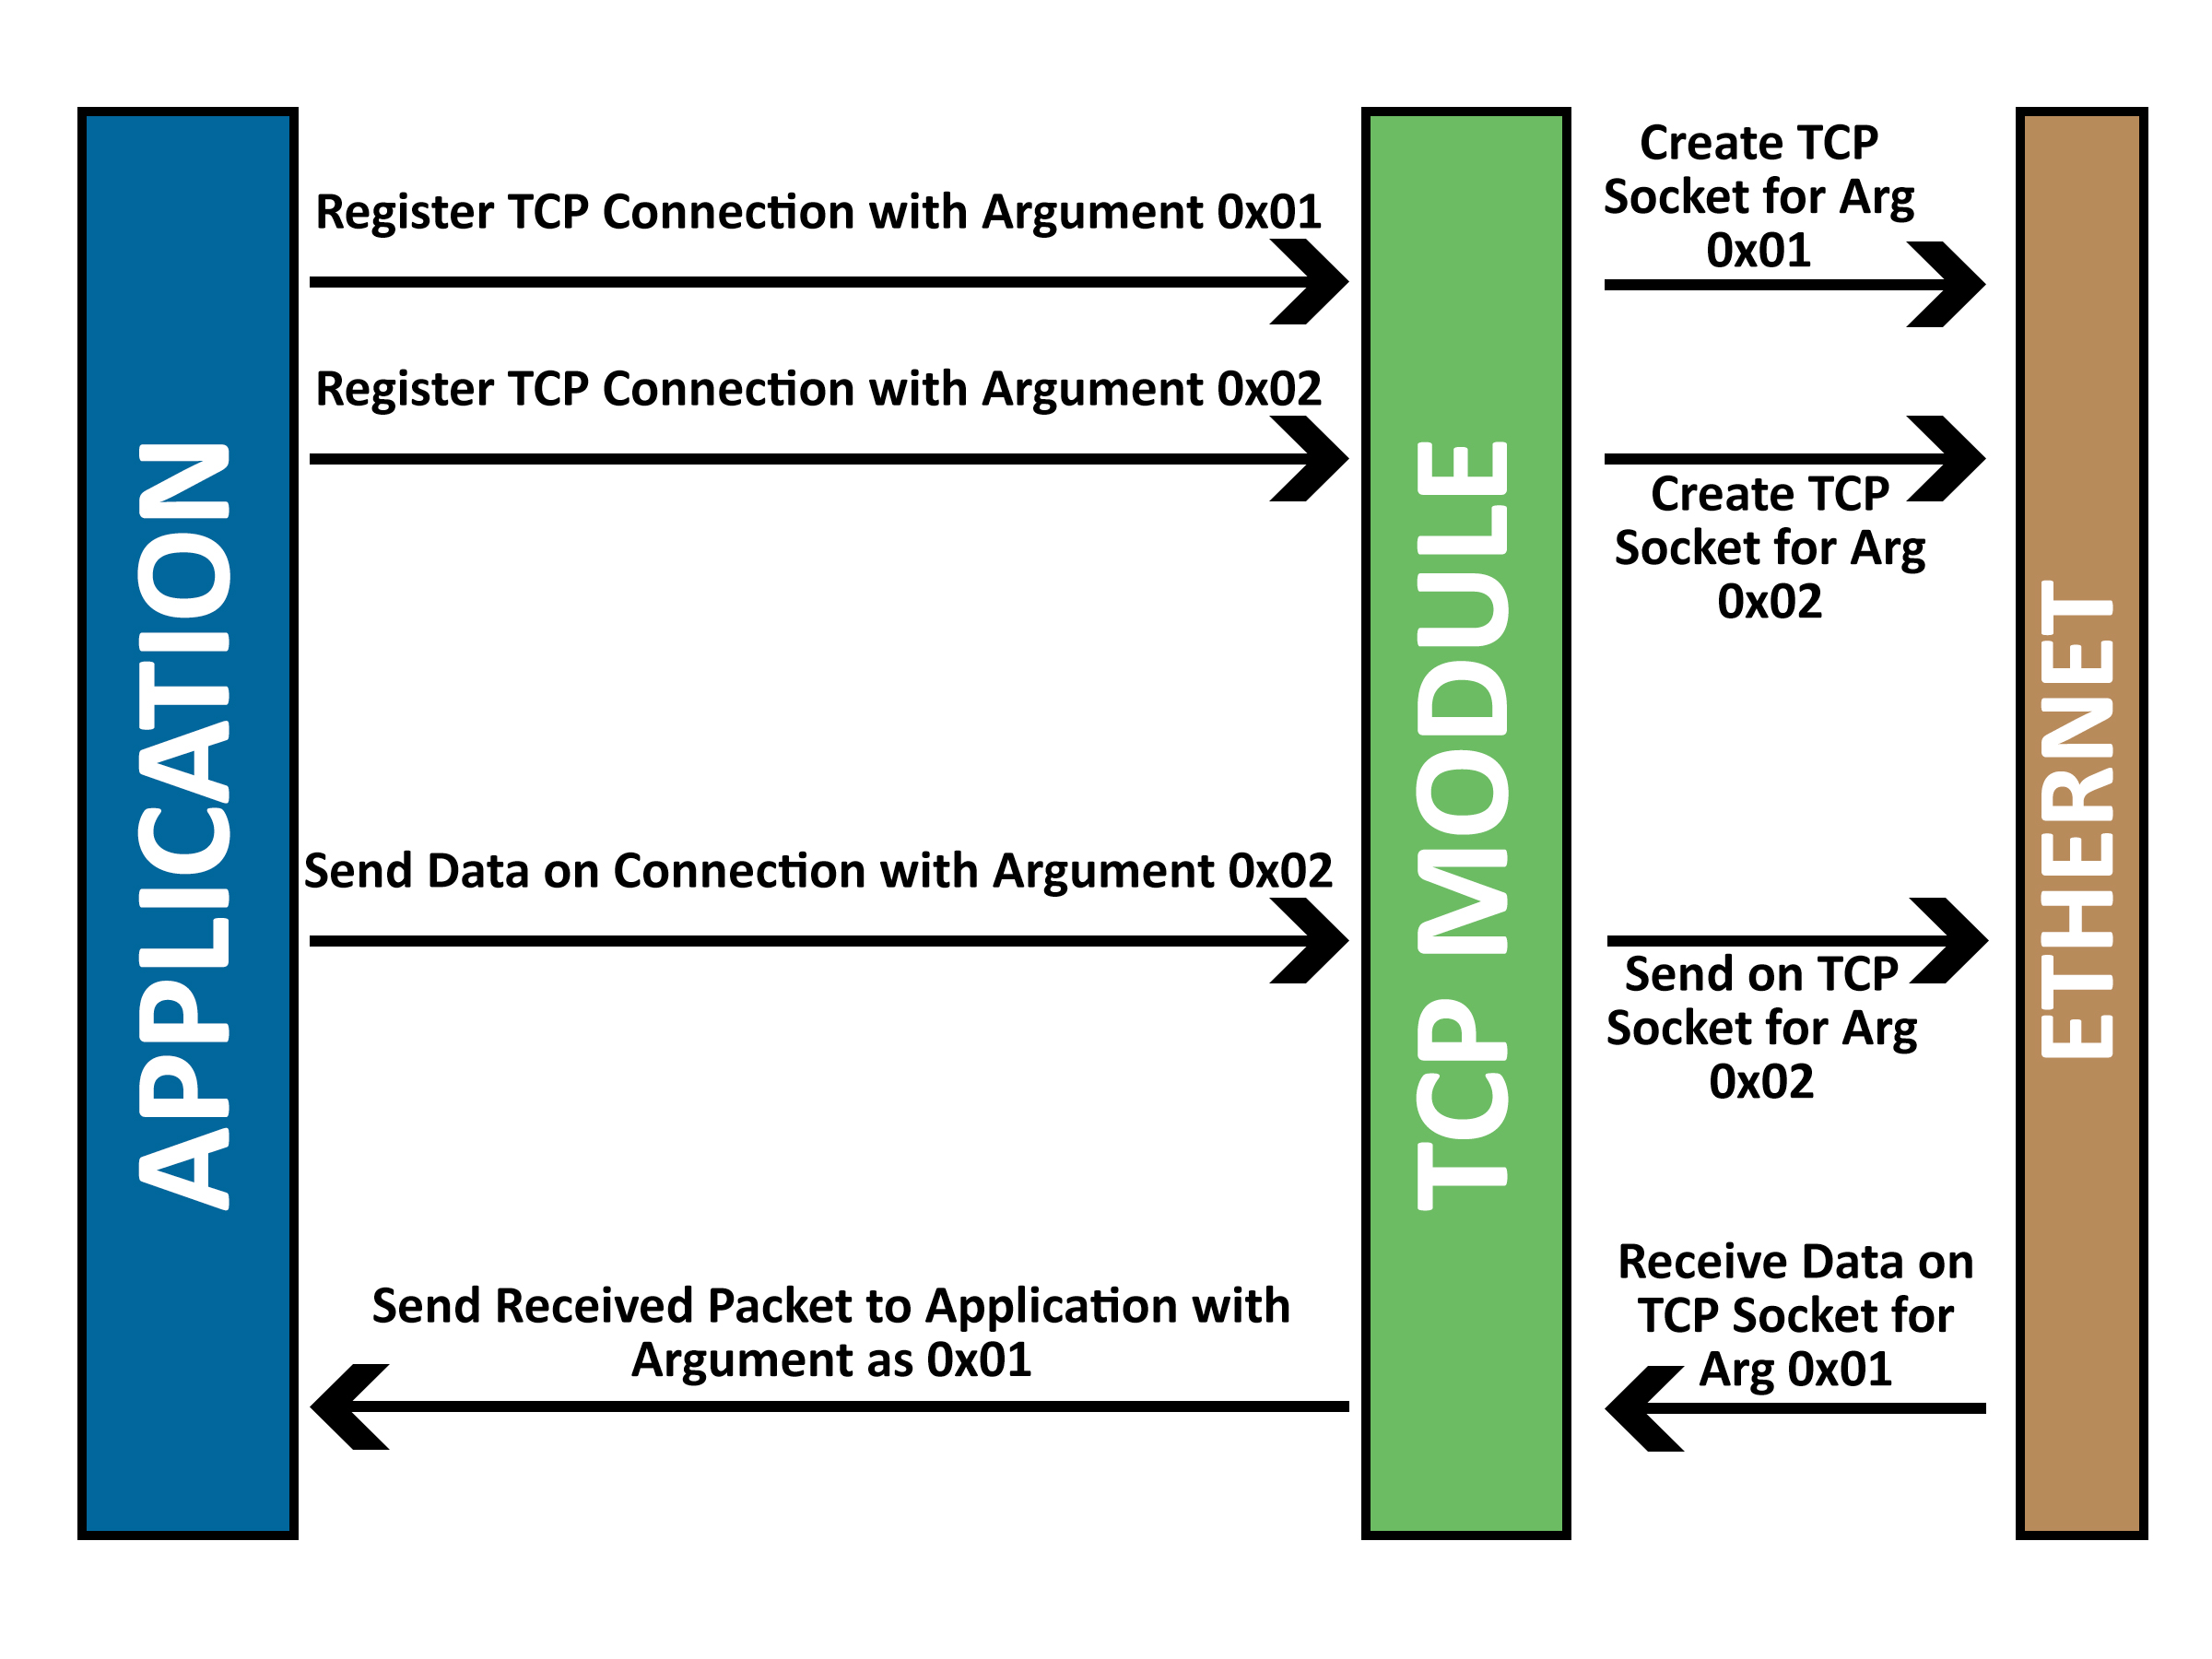 Sequence diagram in figure 1